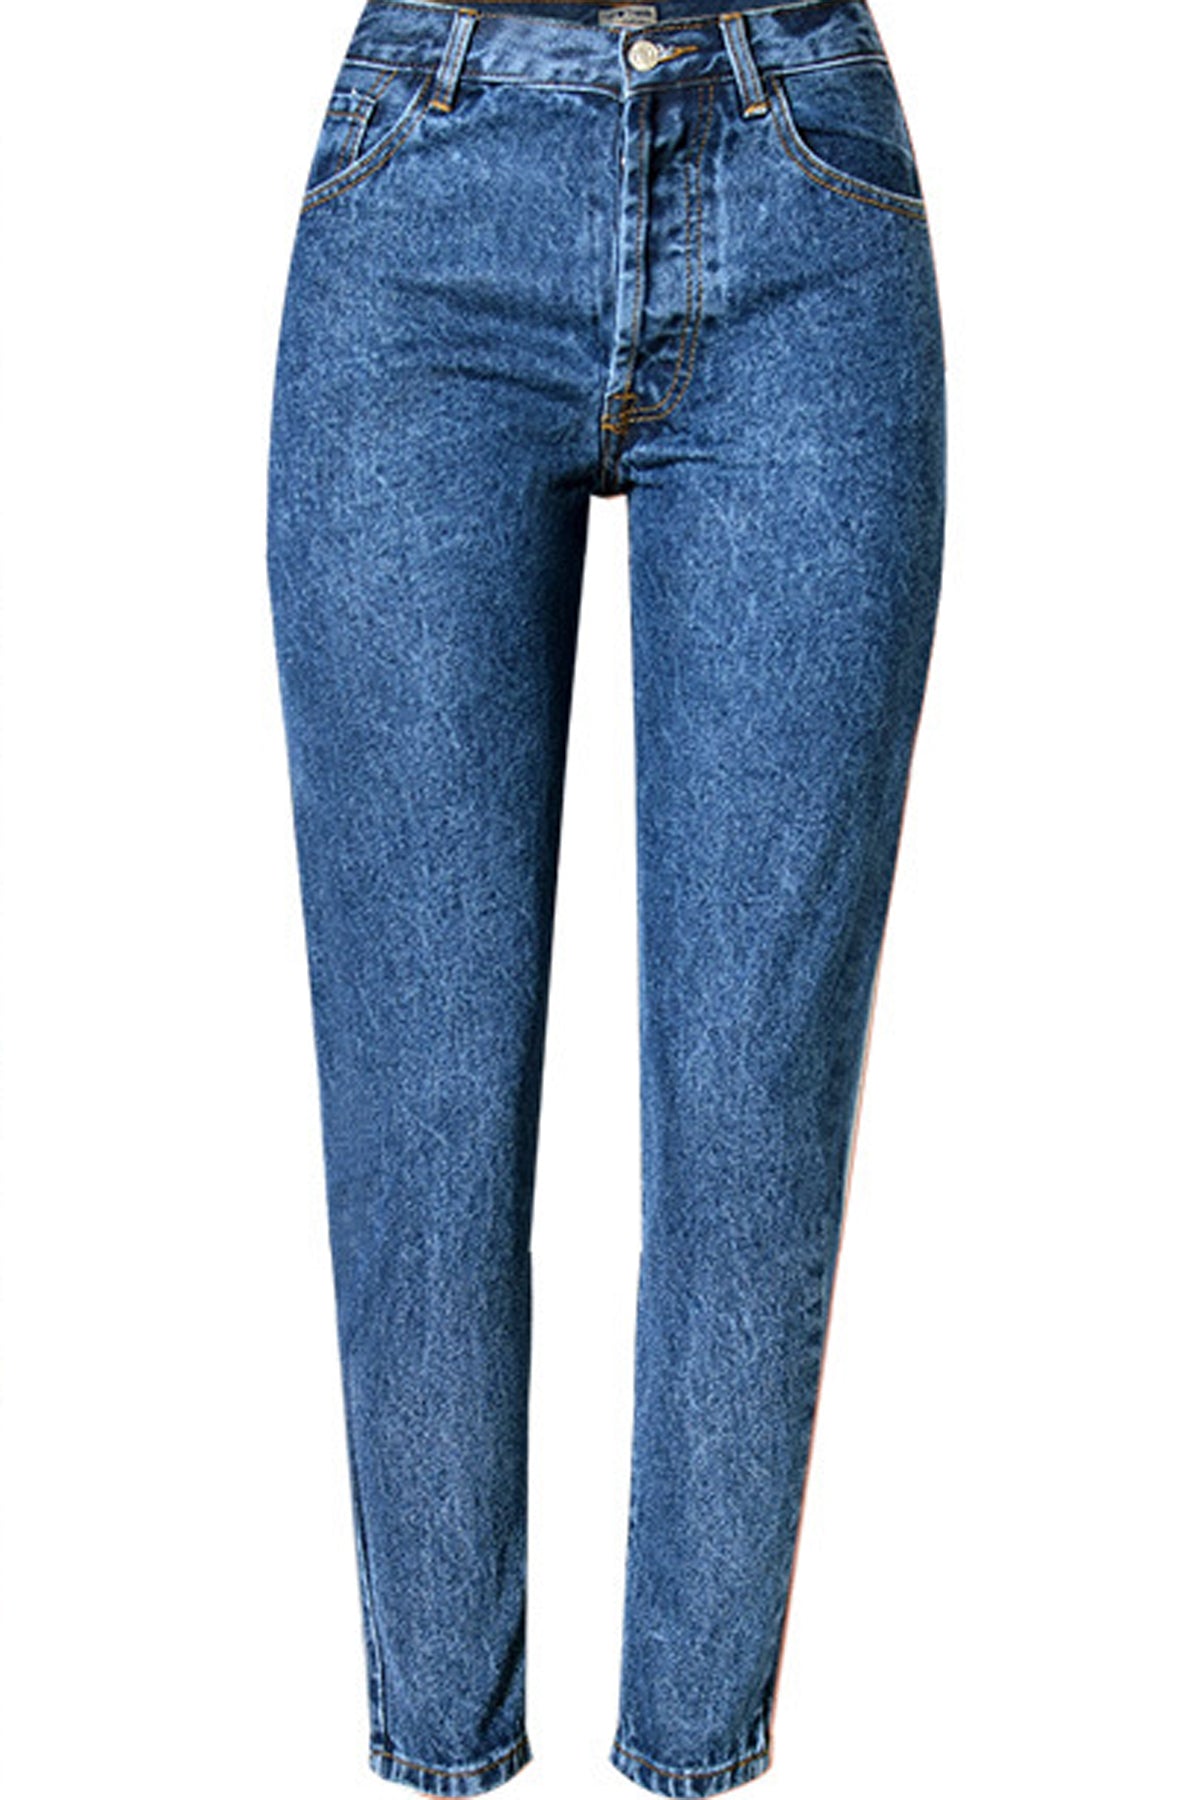 Cut Out Hip Holes Sexy Loose Pencil Long Jeans